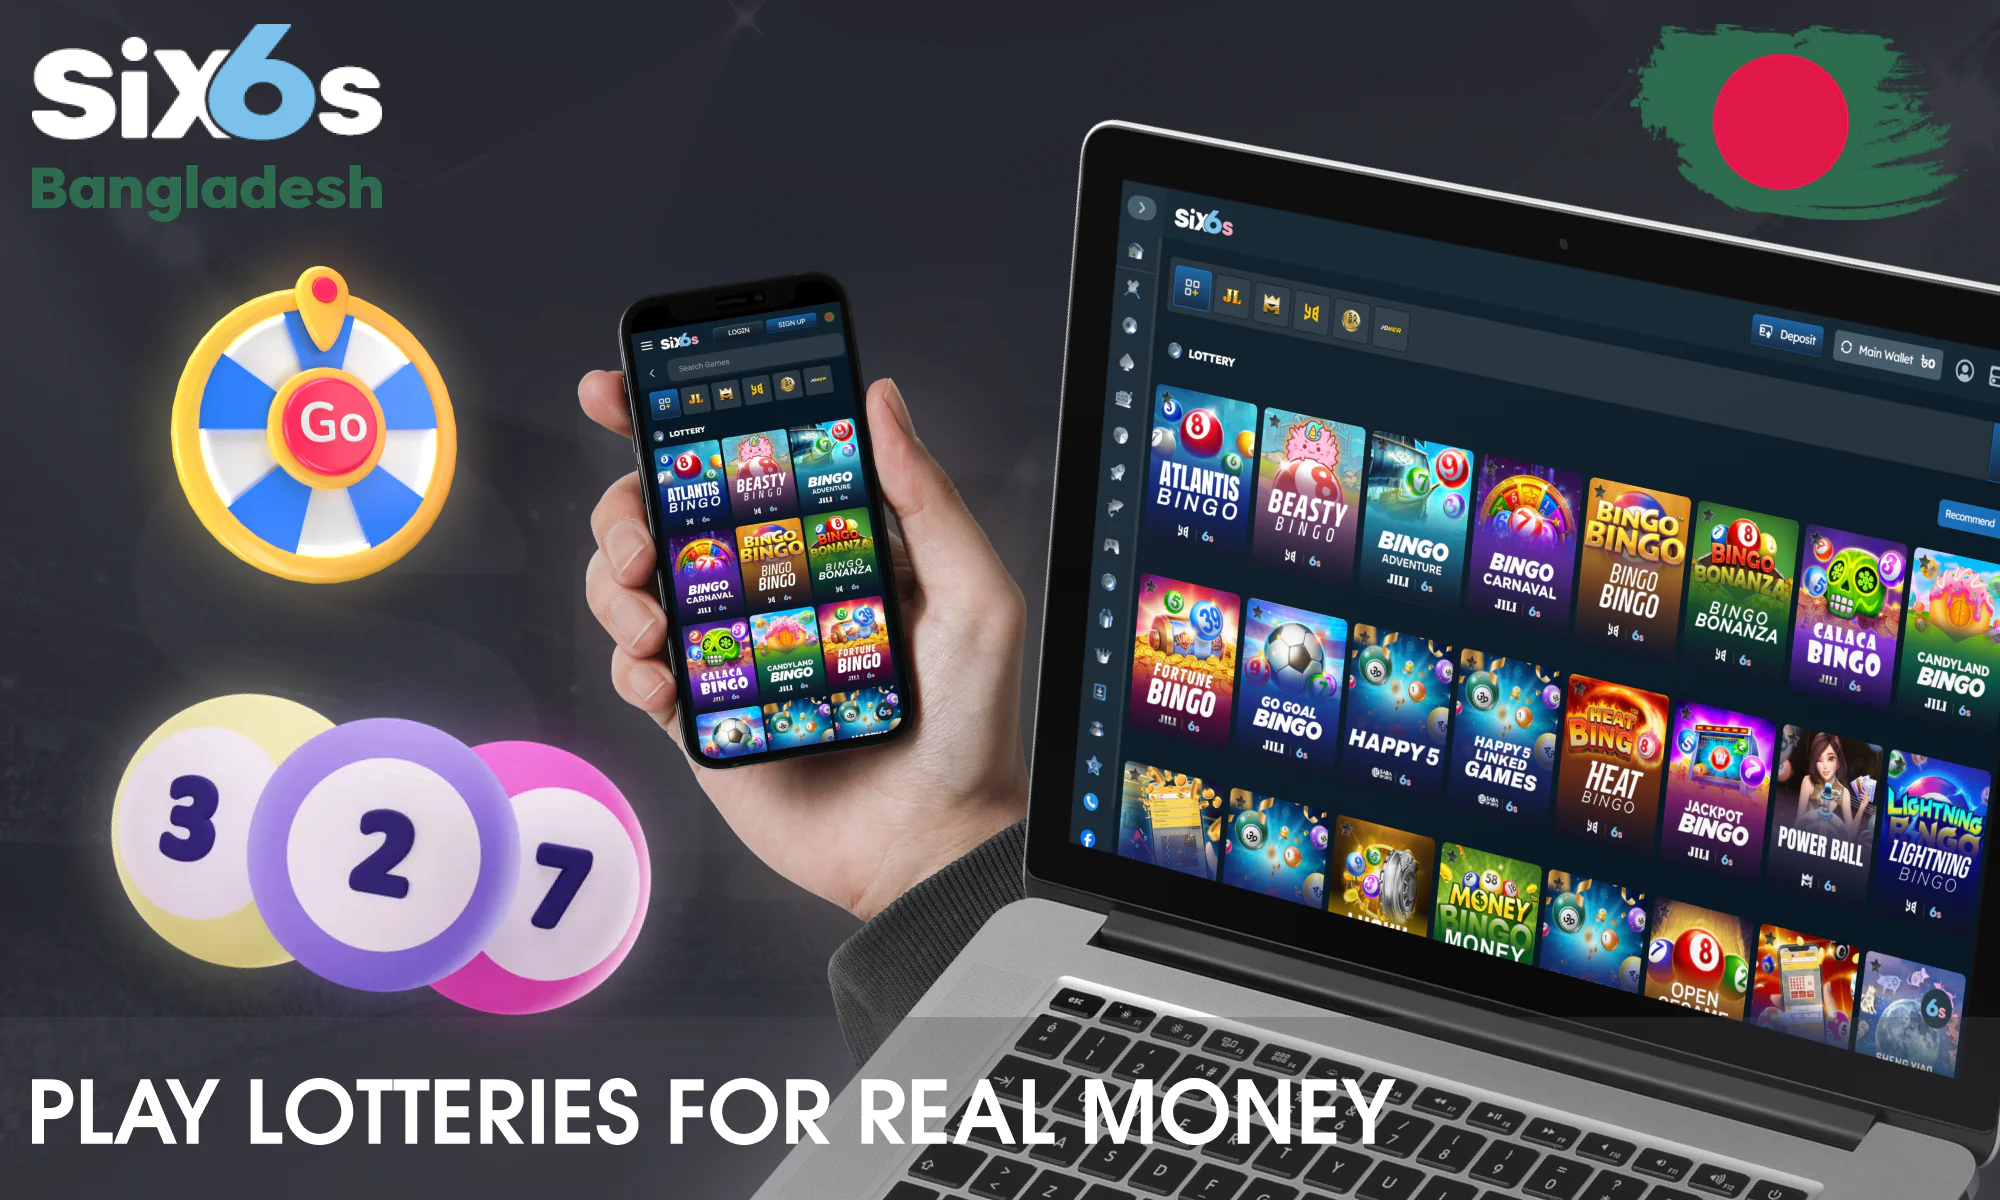 Six6s offers lottery games for real money